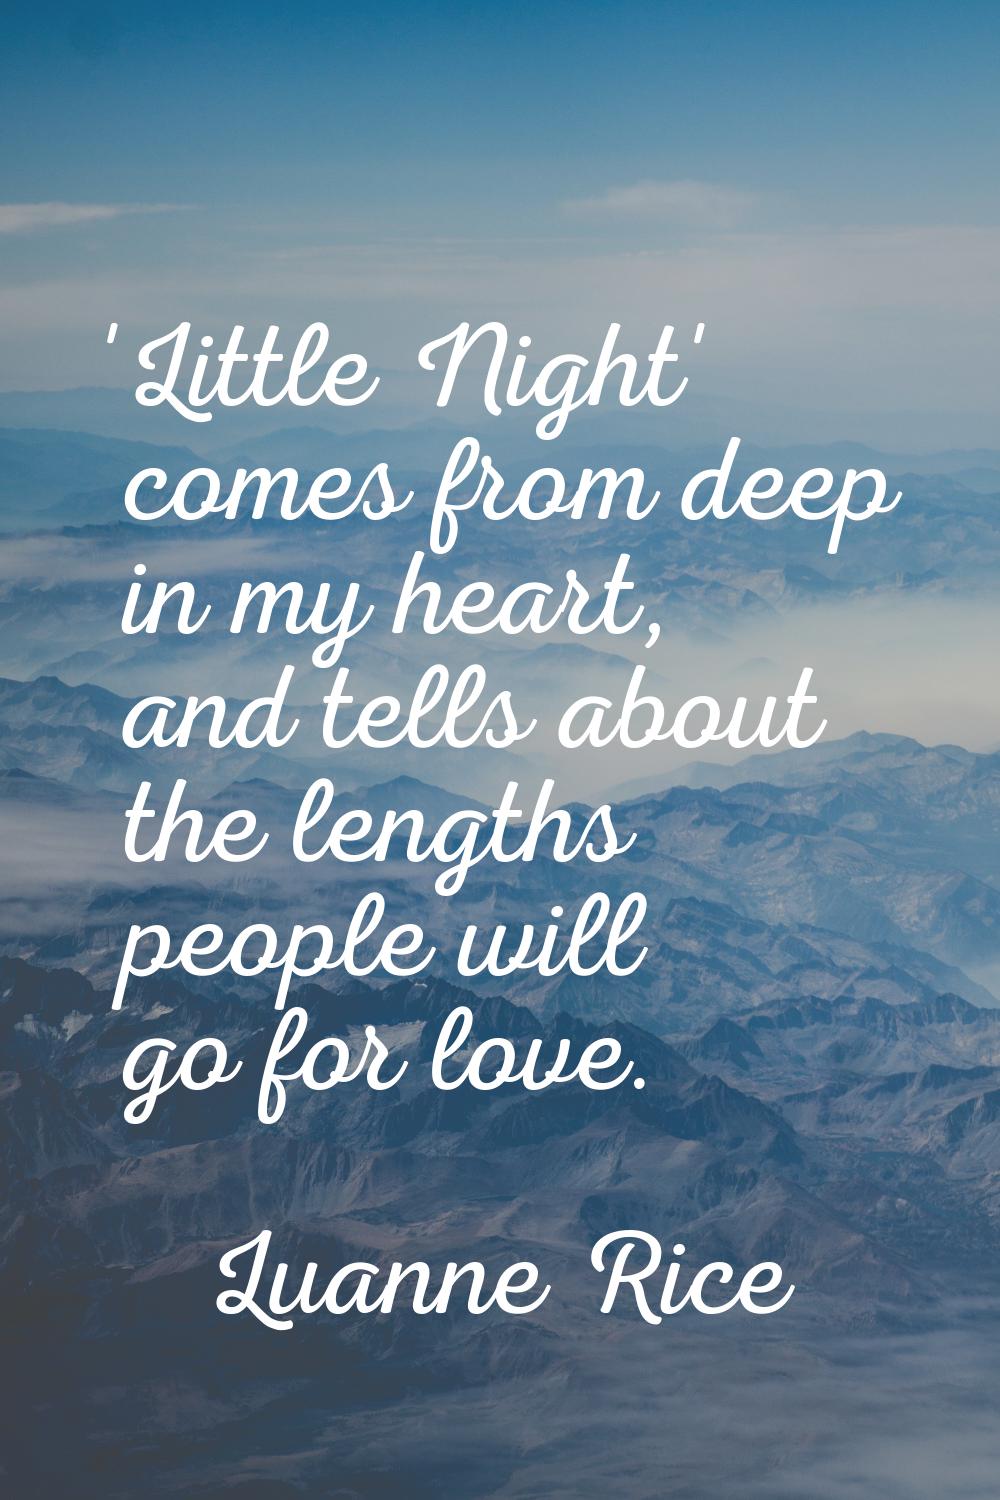 'Little Night' comes from deep in my heart, and tells about the lengths people will go for love.